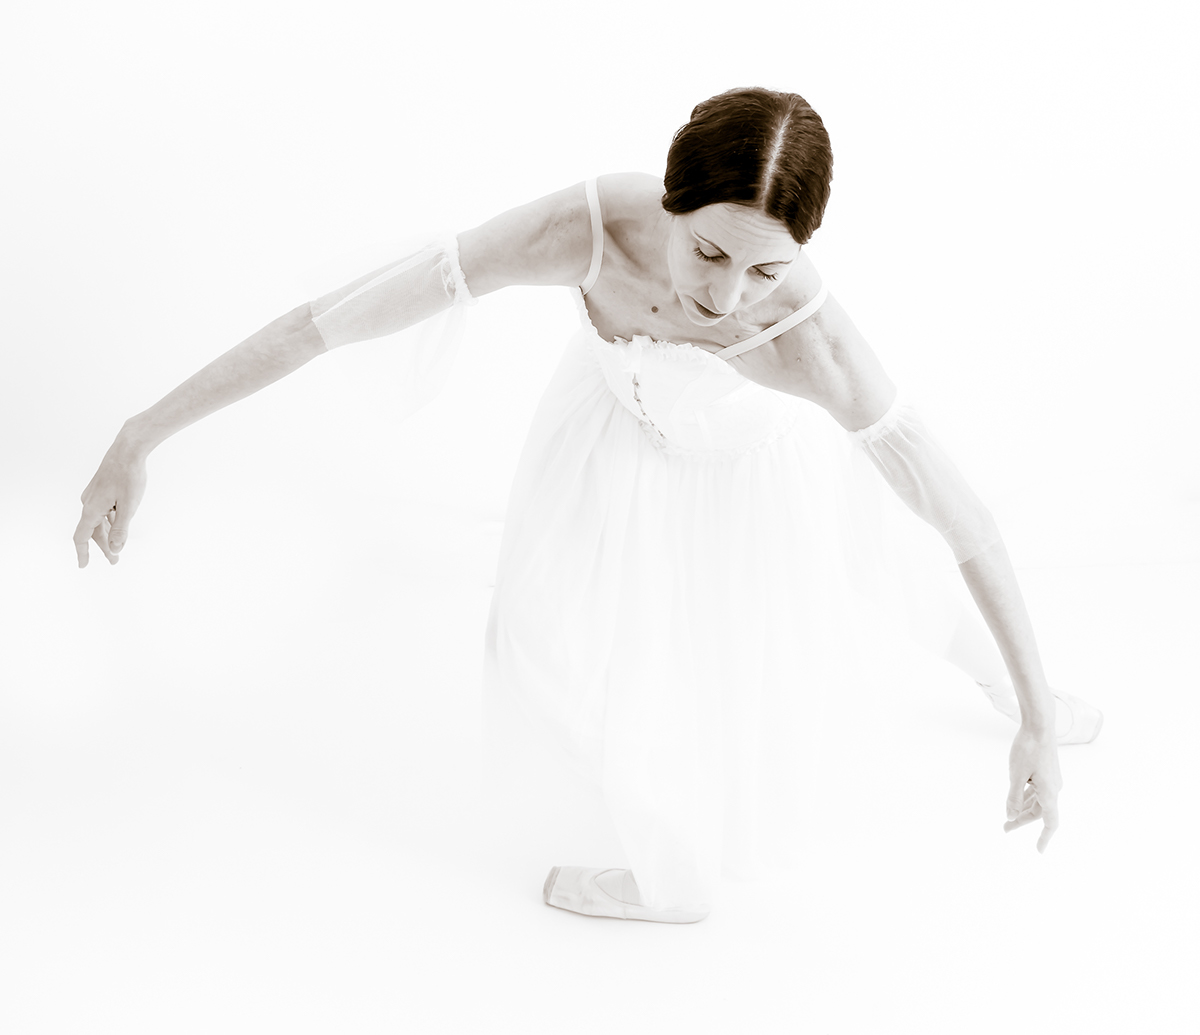 giselle ballet ballerina White pointe shoes Photography  dance photography High Key